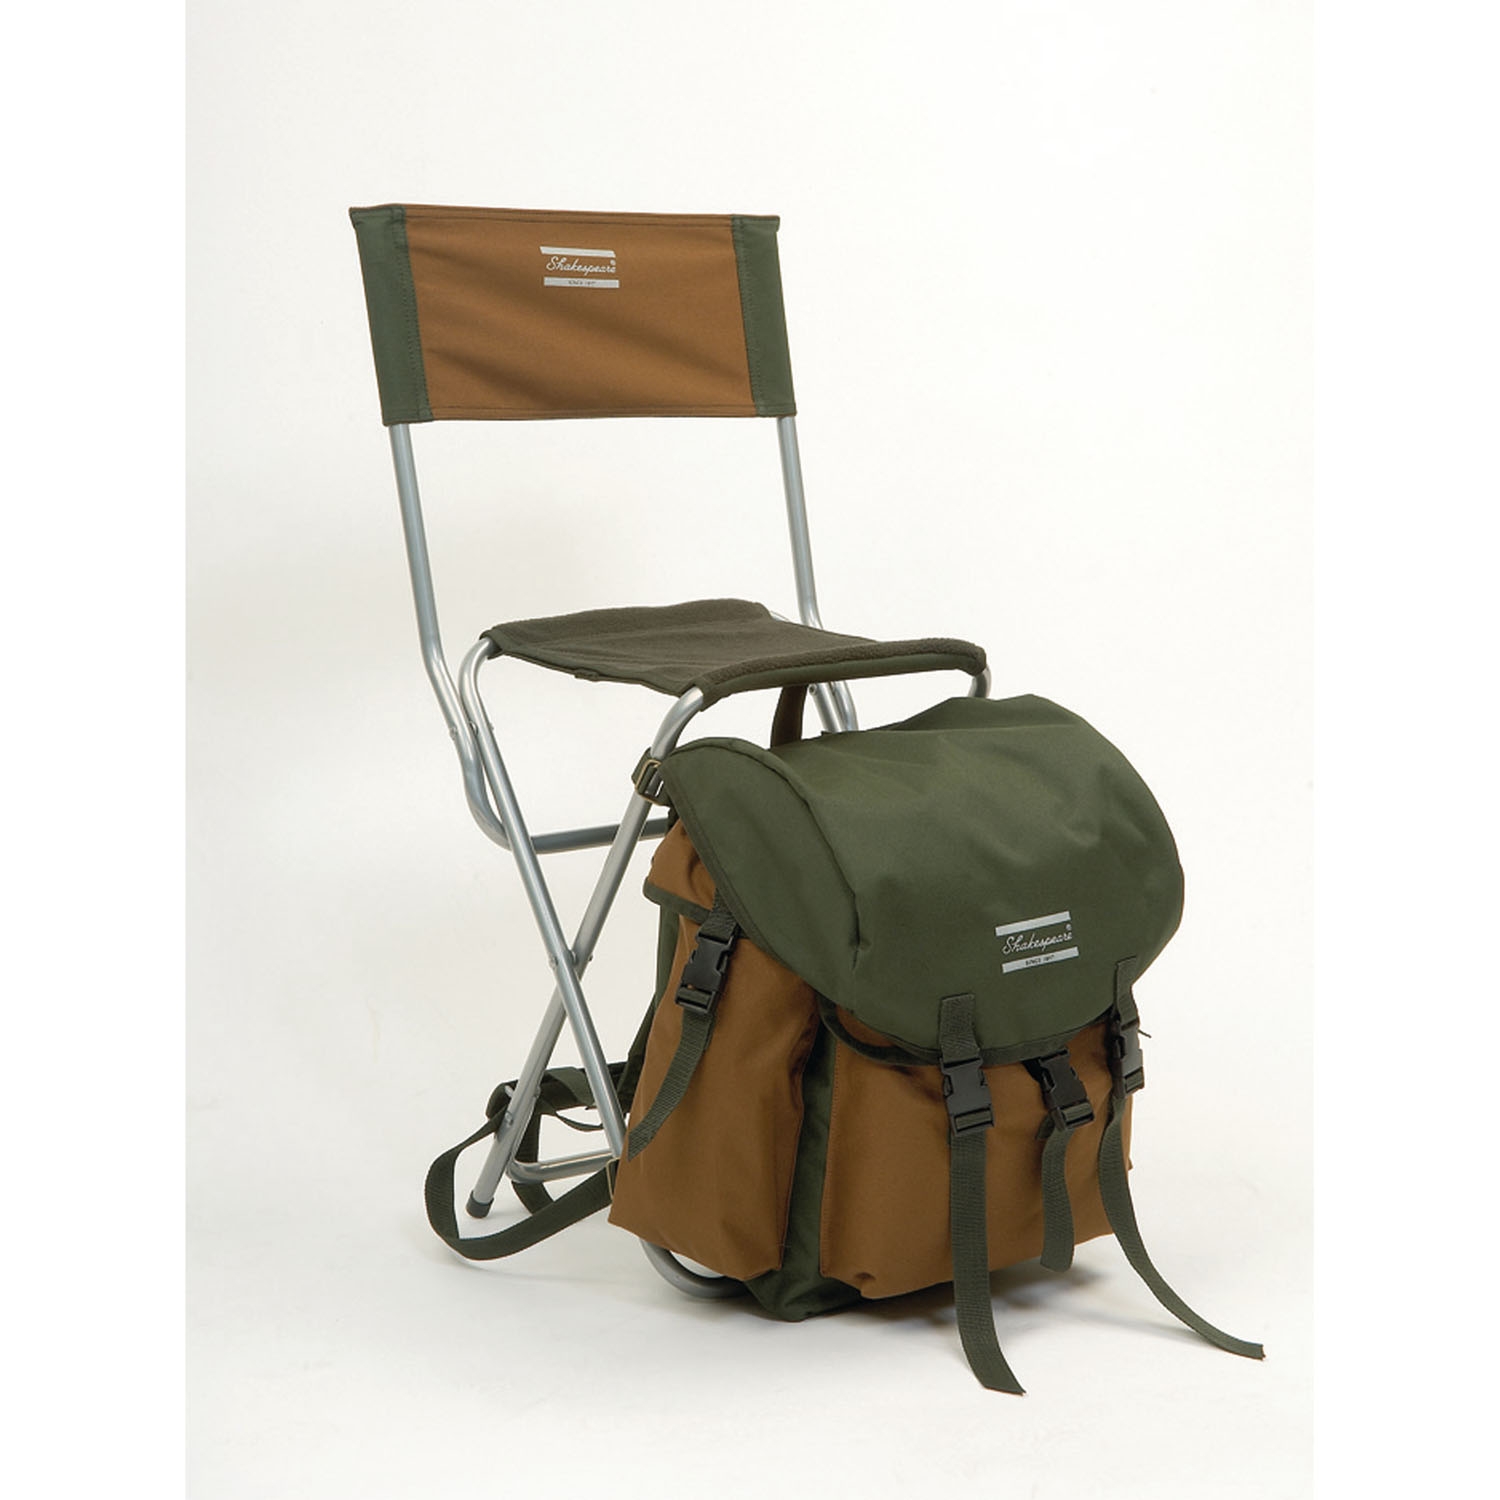 Shakespeare Folding Chair With Rucksack - Fishing Stool Bag